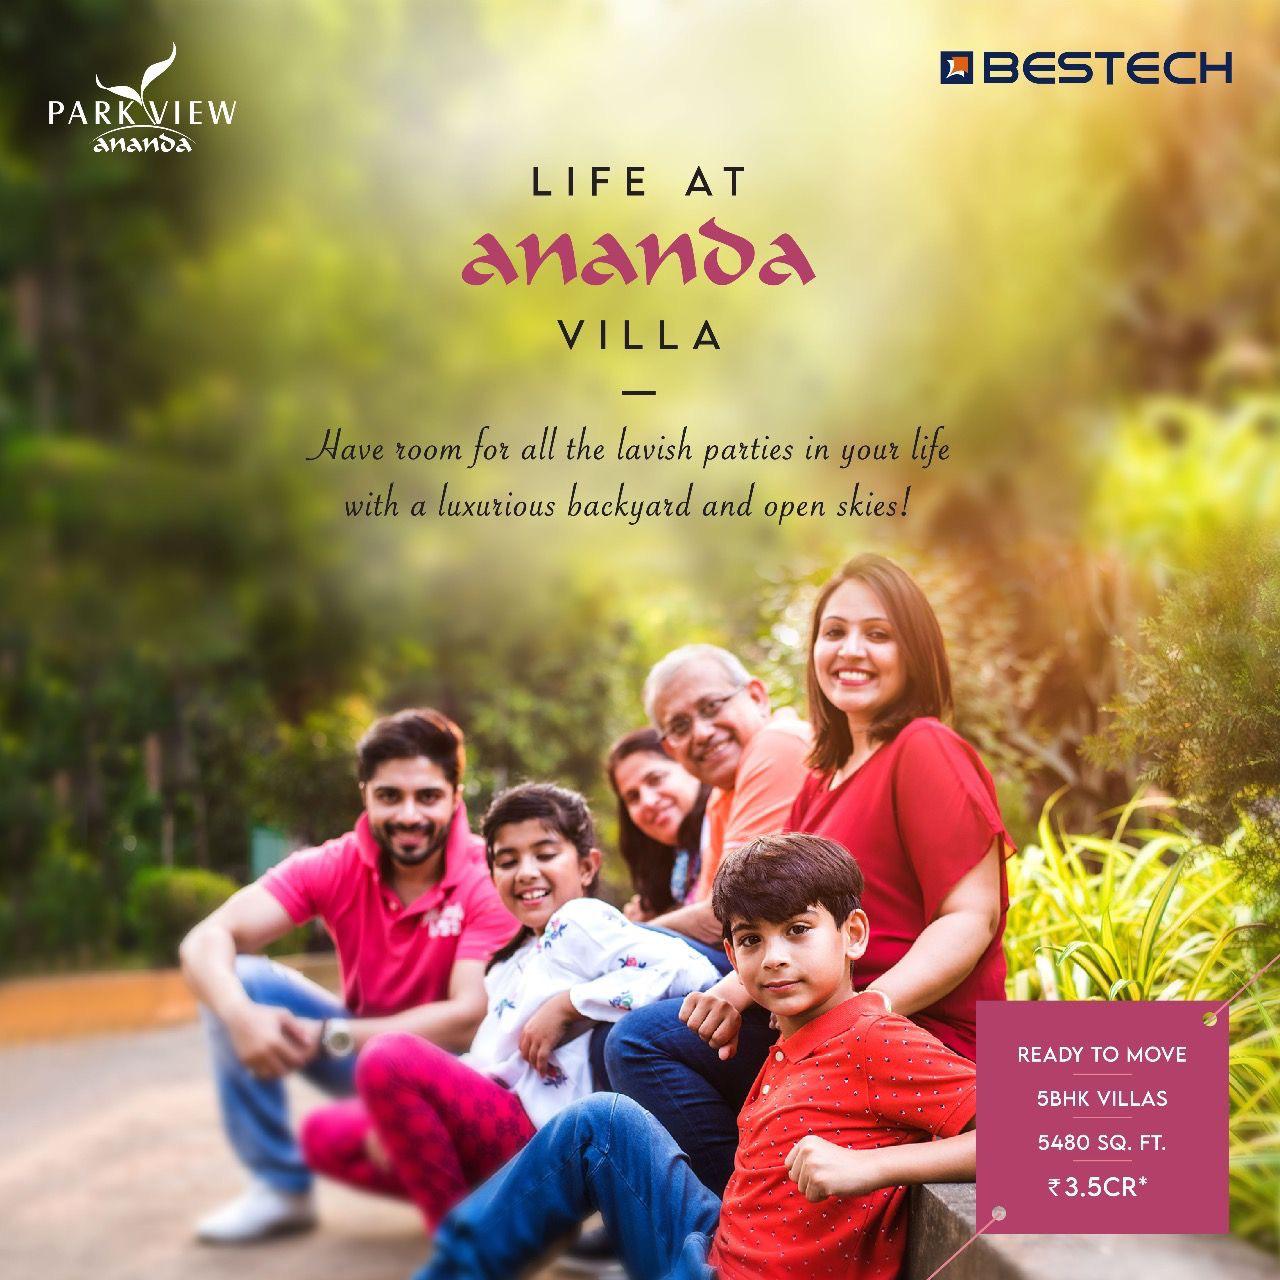 Live the villa life with a luxurious backyard and open skies at Bestech Park View Ananda in Gurgaon